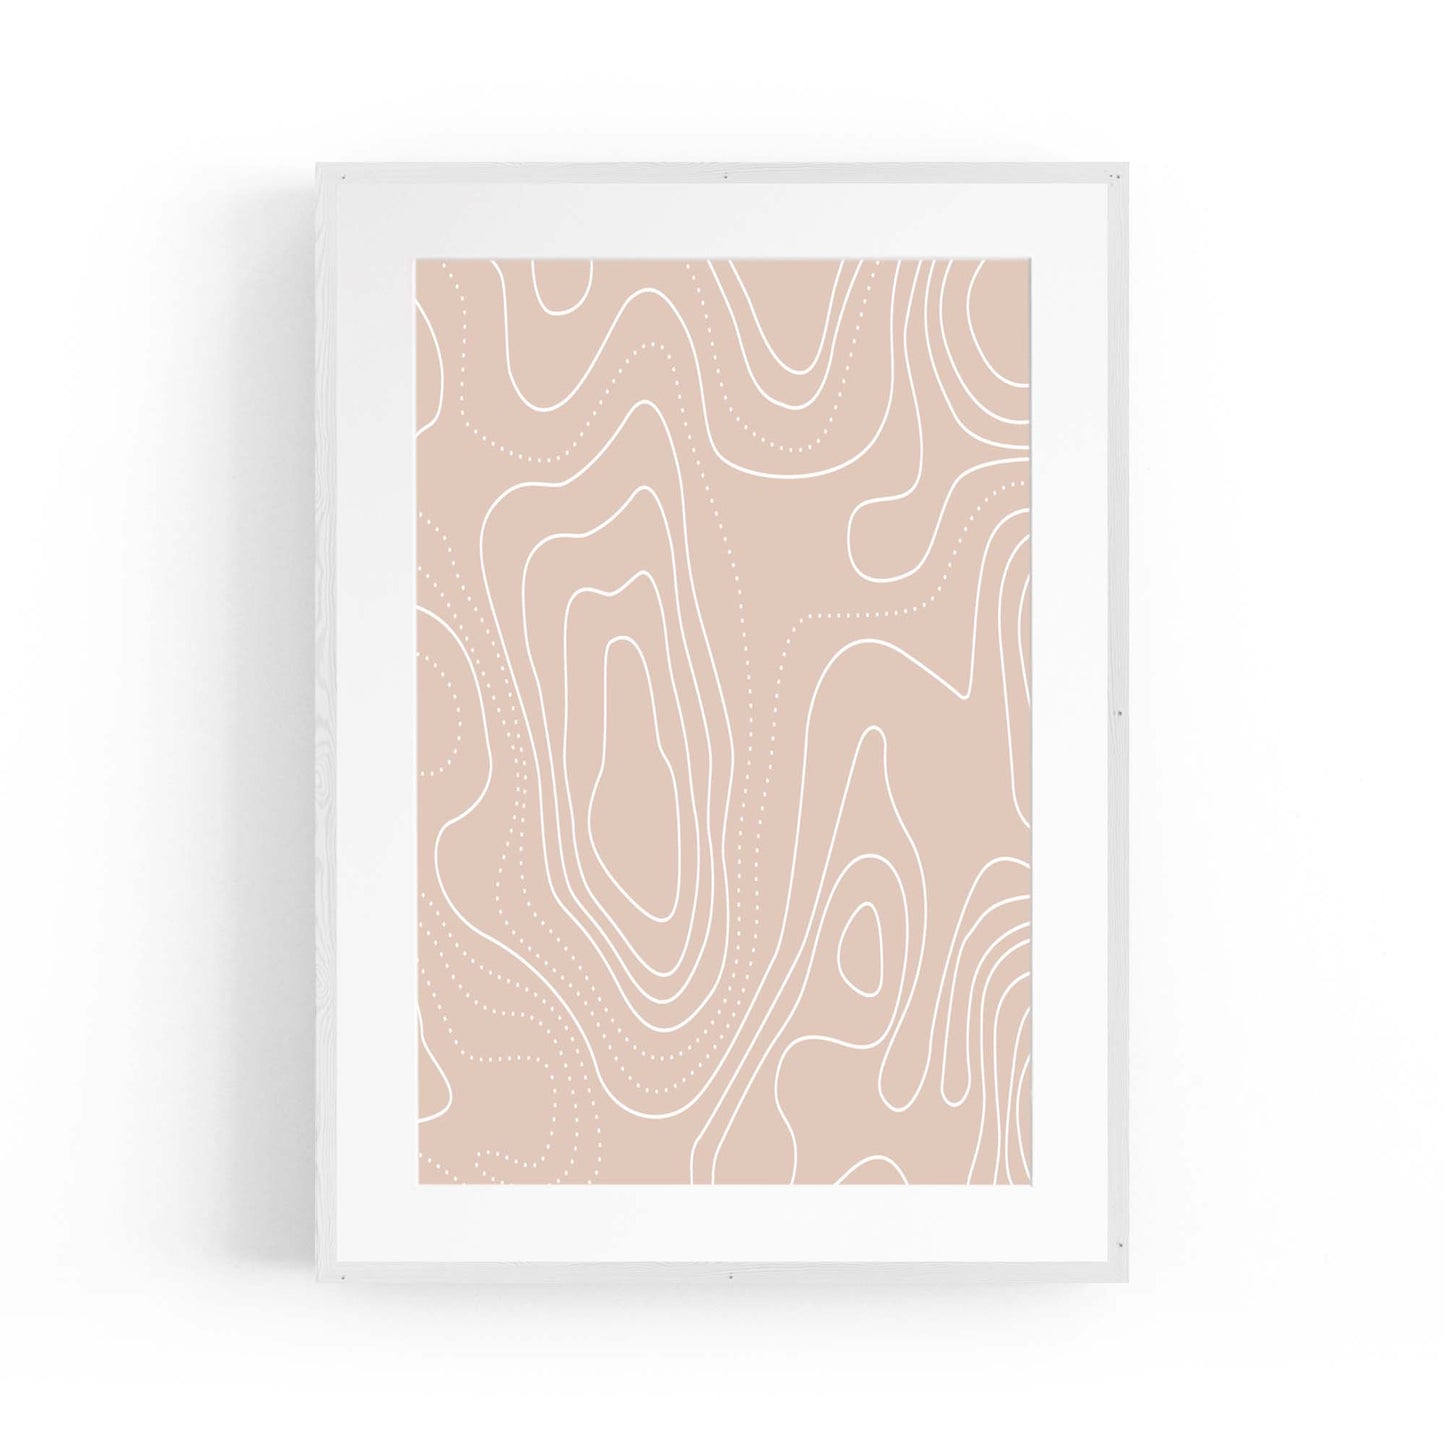 Calm Abstract Minimal Pastel Modern Wall Art #5 - The Affordable Art Company